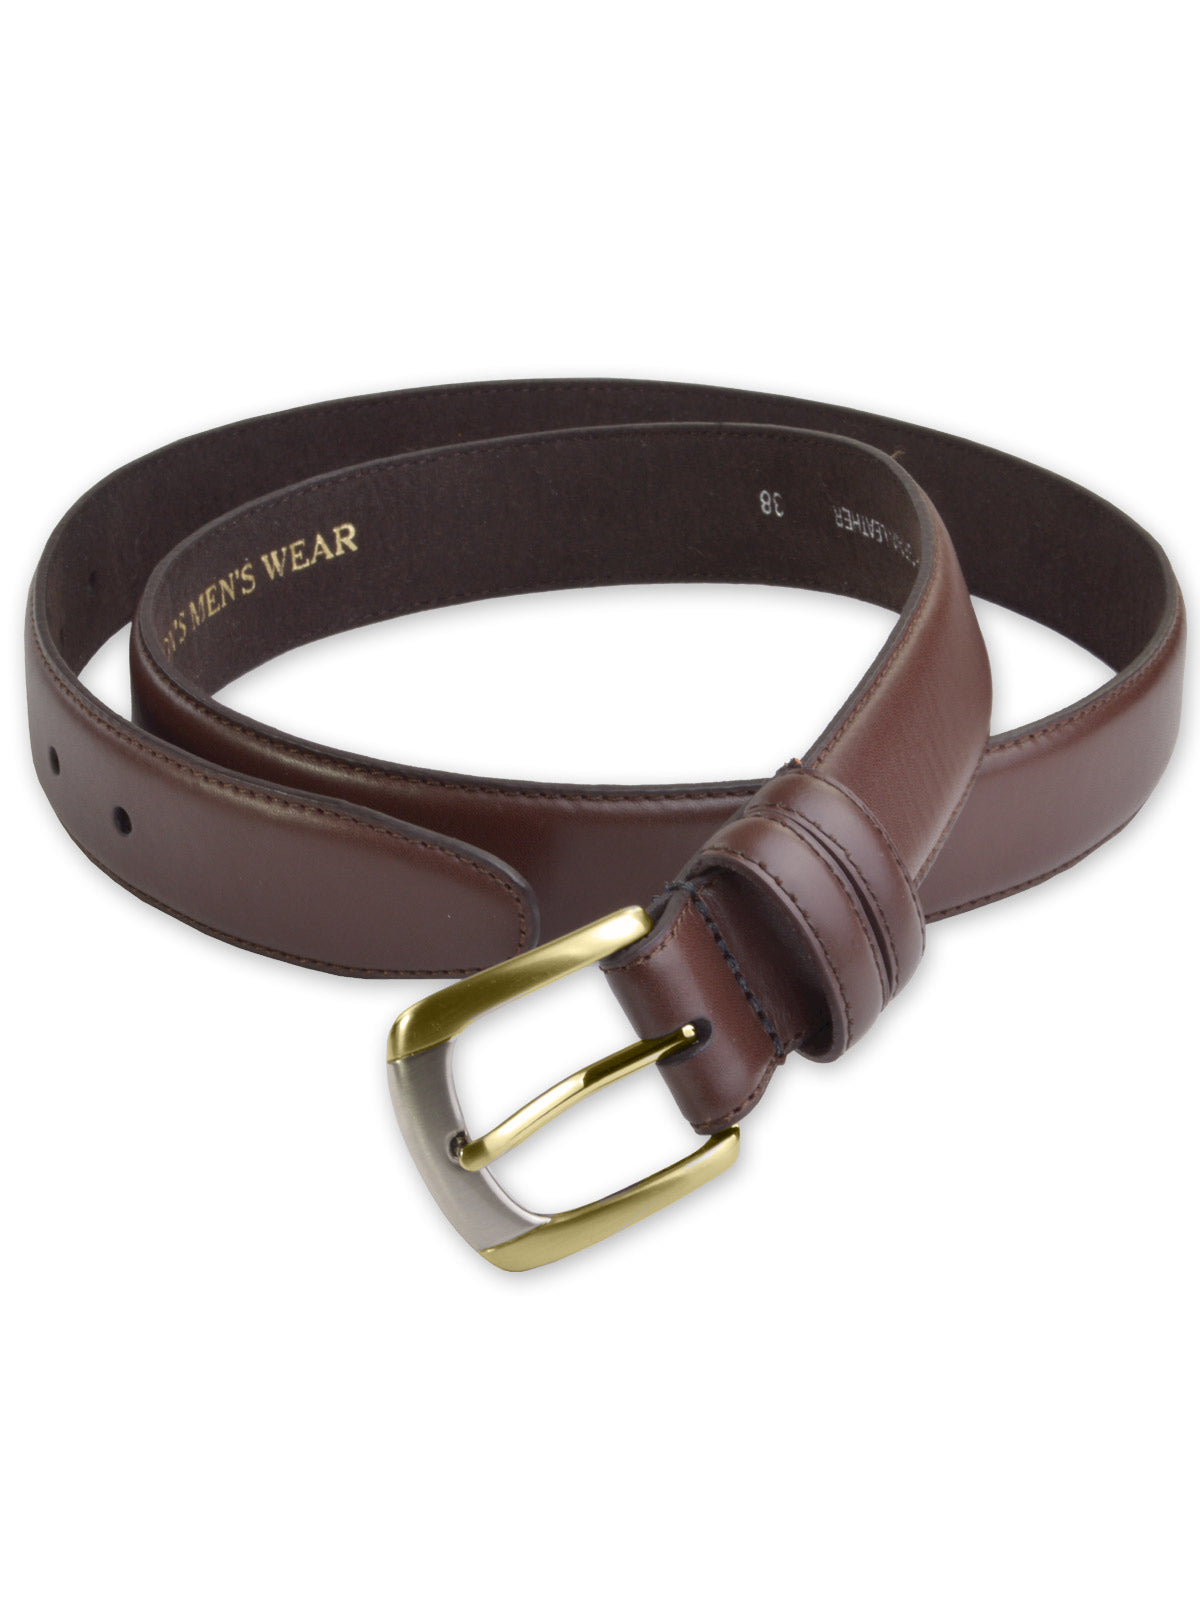 Marc Wolf Leather Dress Belts - Two Tone Buckle (5 - 0